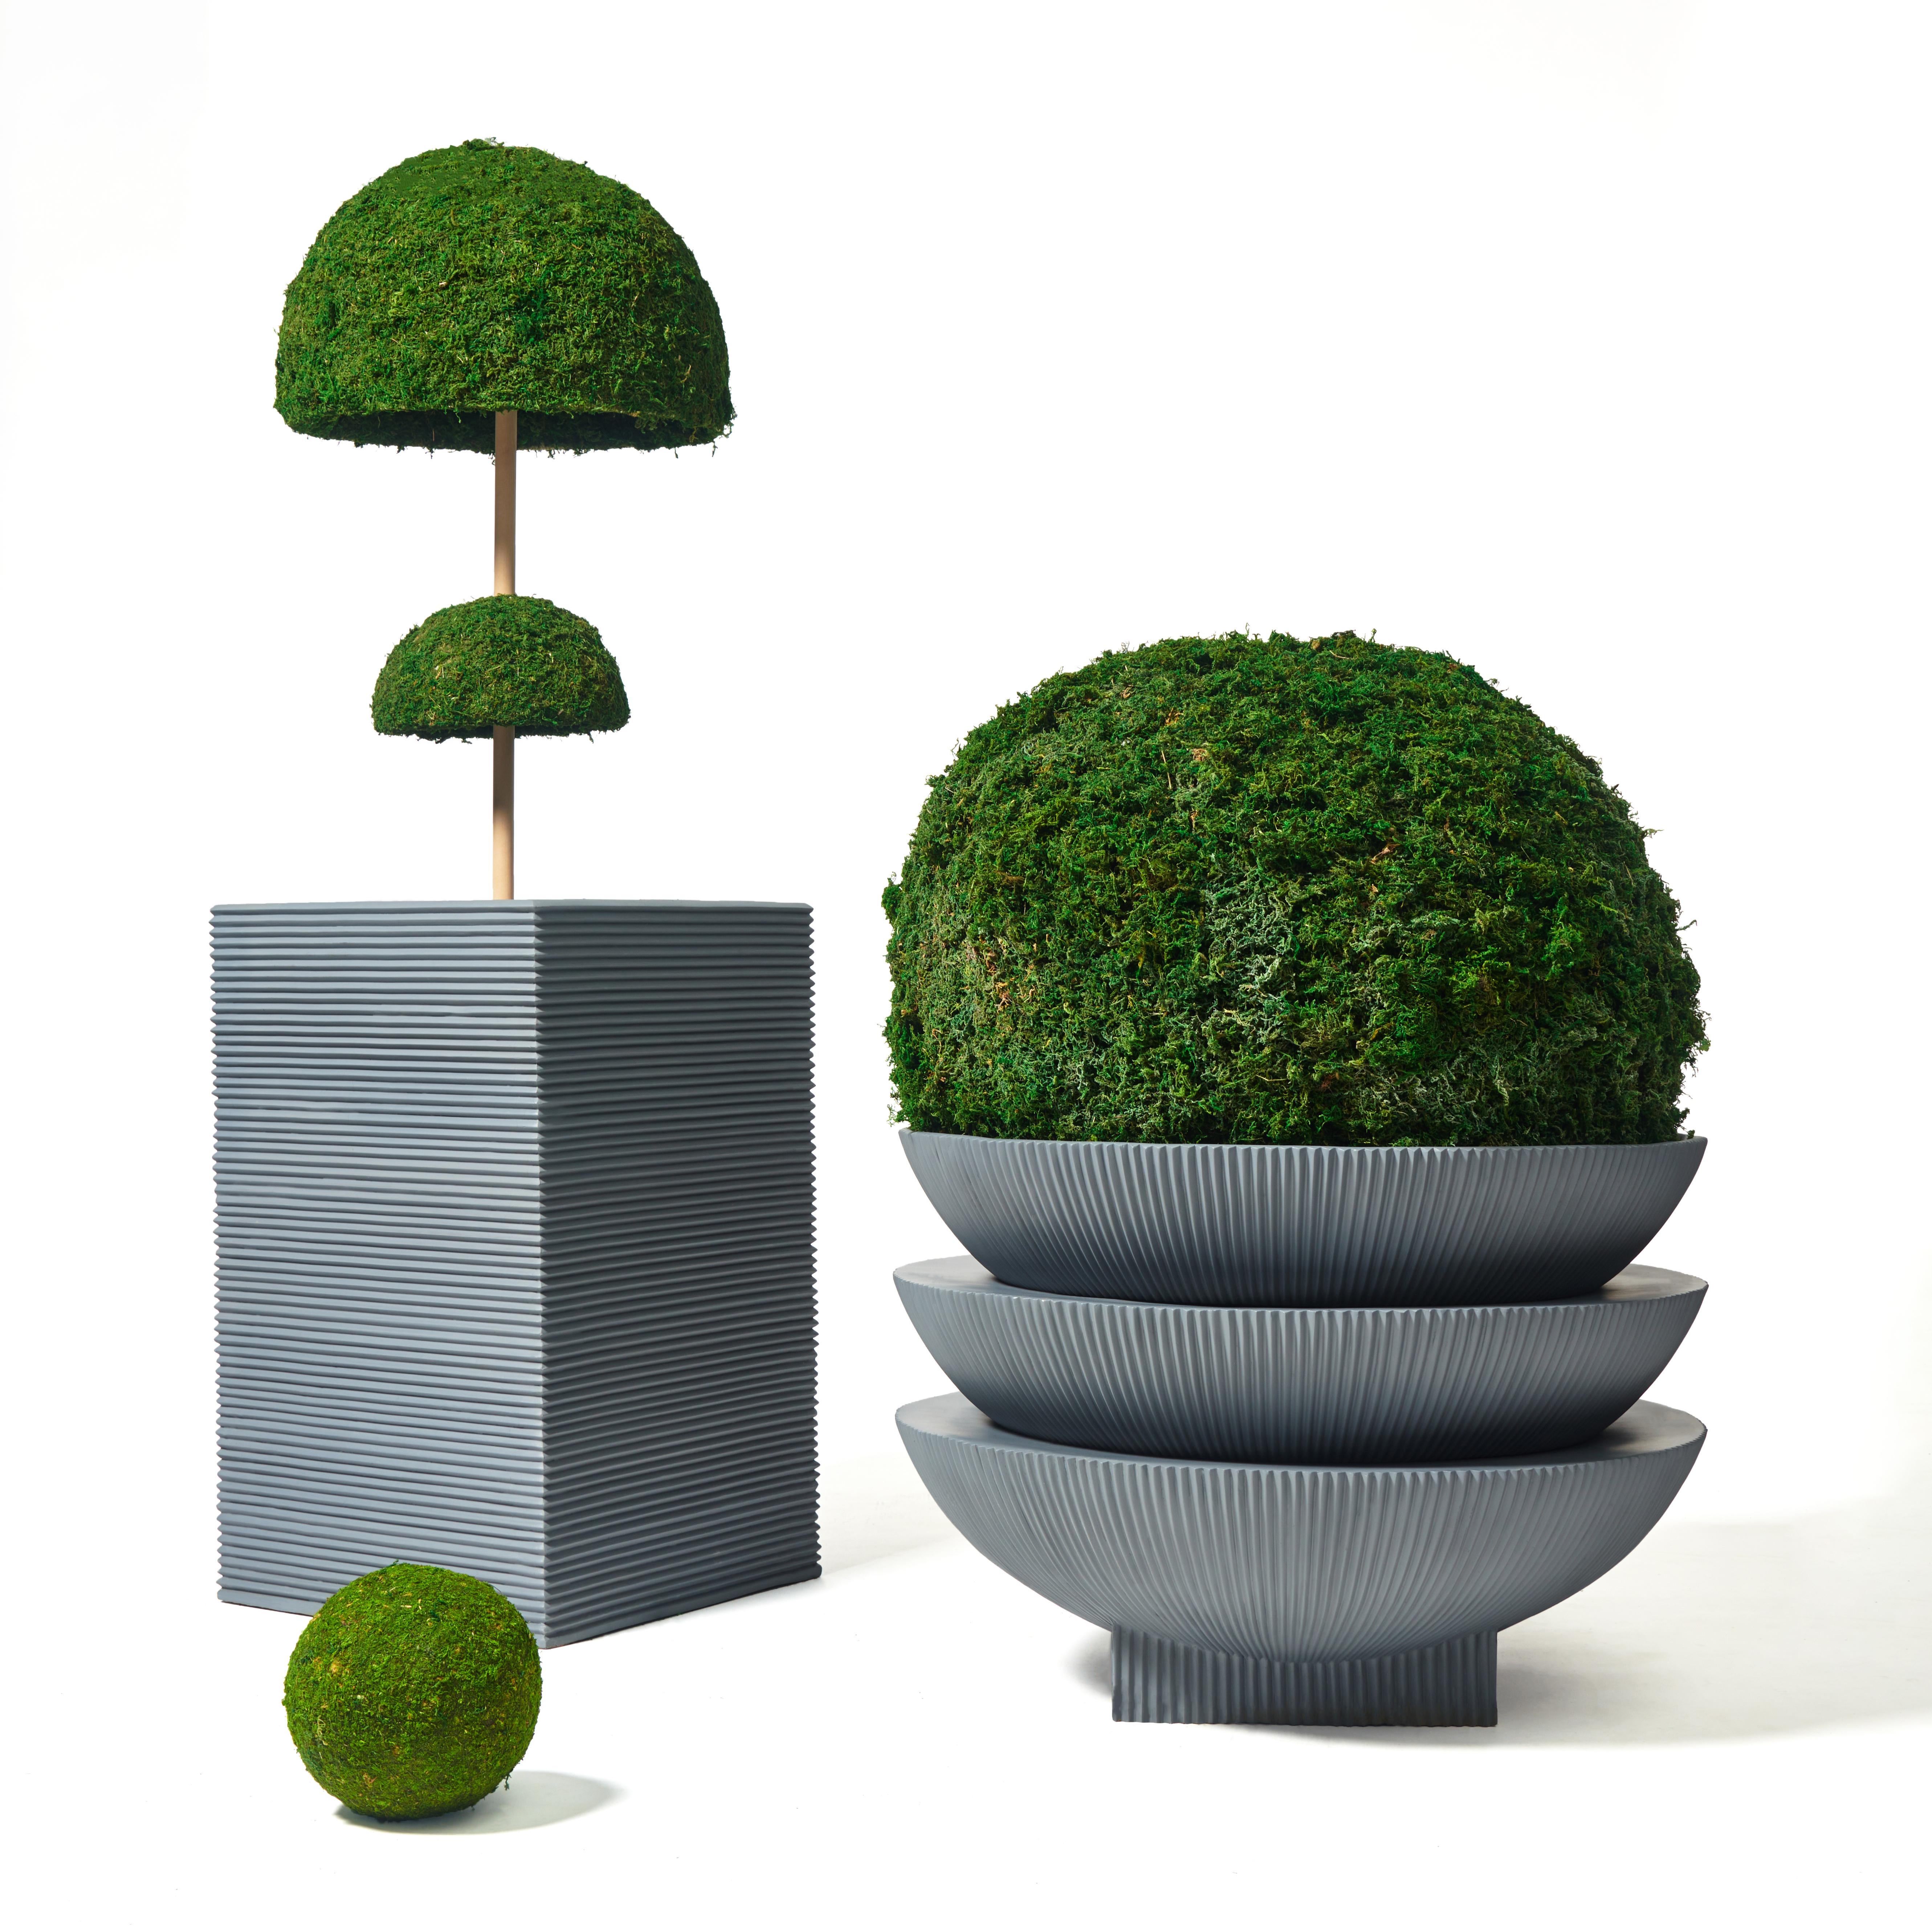 Modern Oversize Half Dome Stack Planter 'Orange' by TFM, Represented by Tuleste Factory